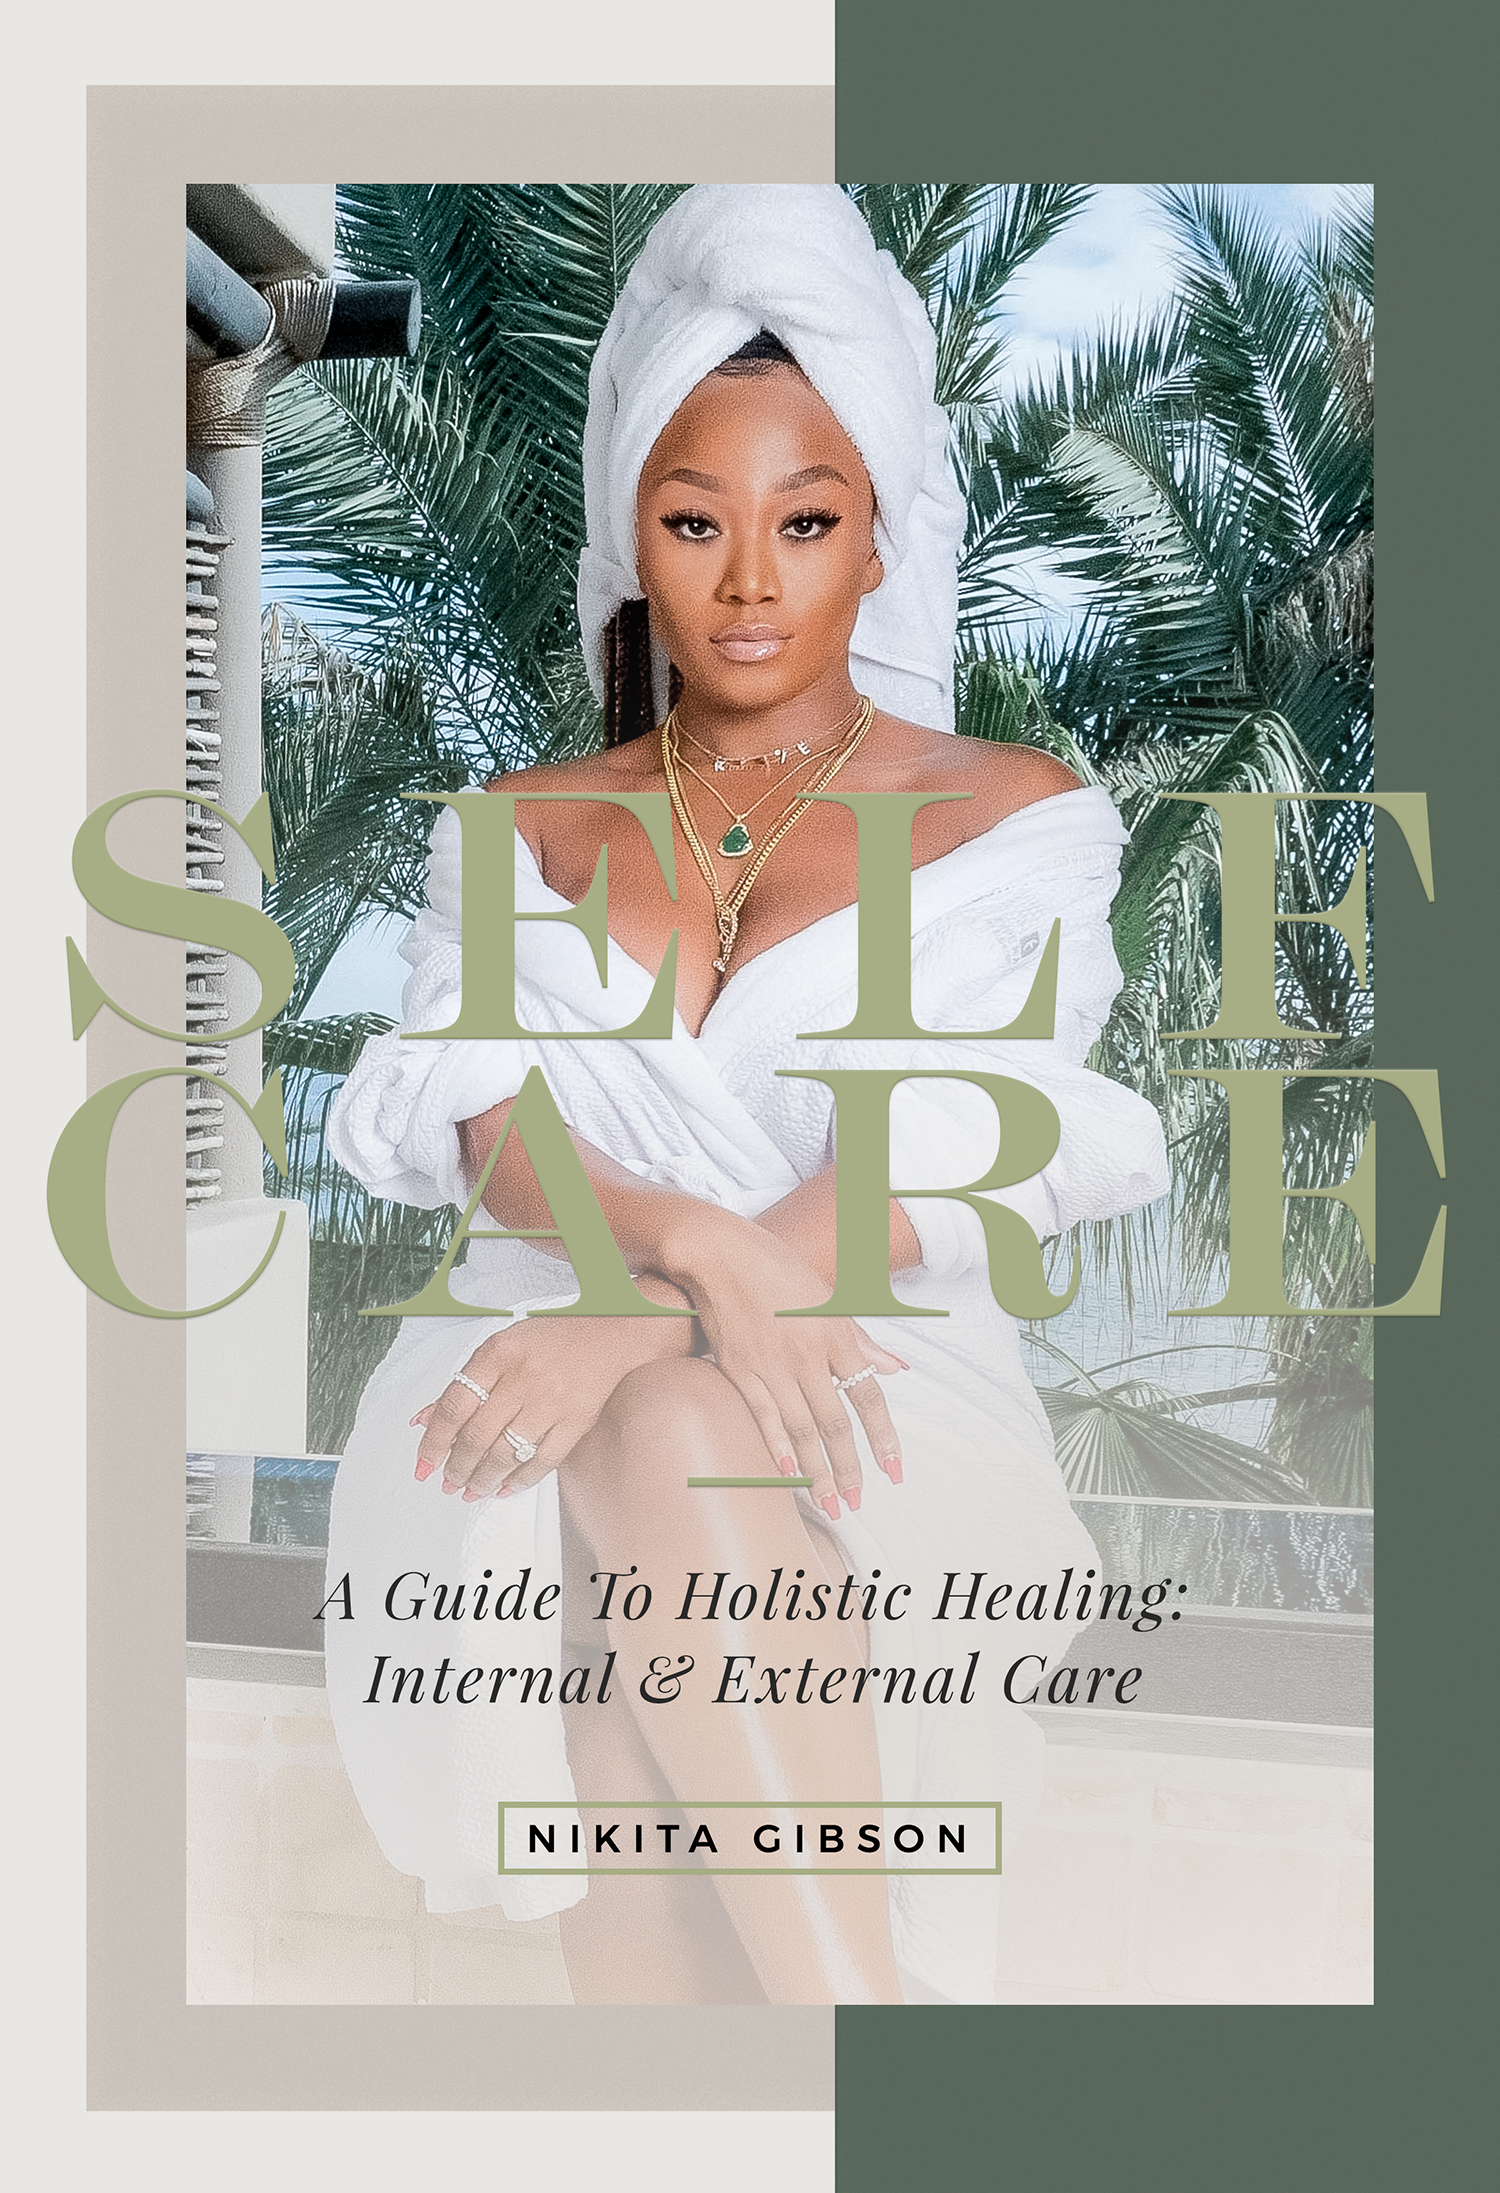 HARDCOVER "SELF CARE - A GUIDE TO HOLISTIC HEALING: INTERNAL & EXTERNAL"